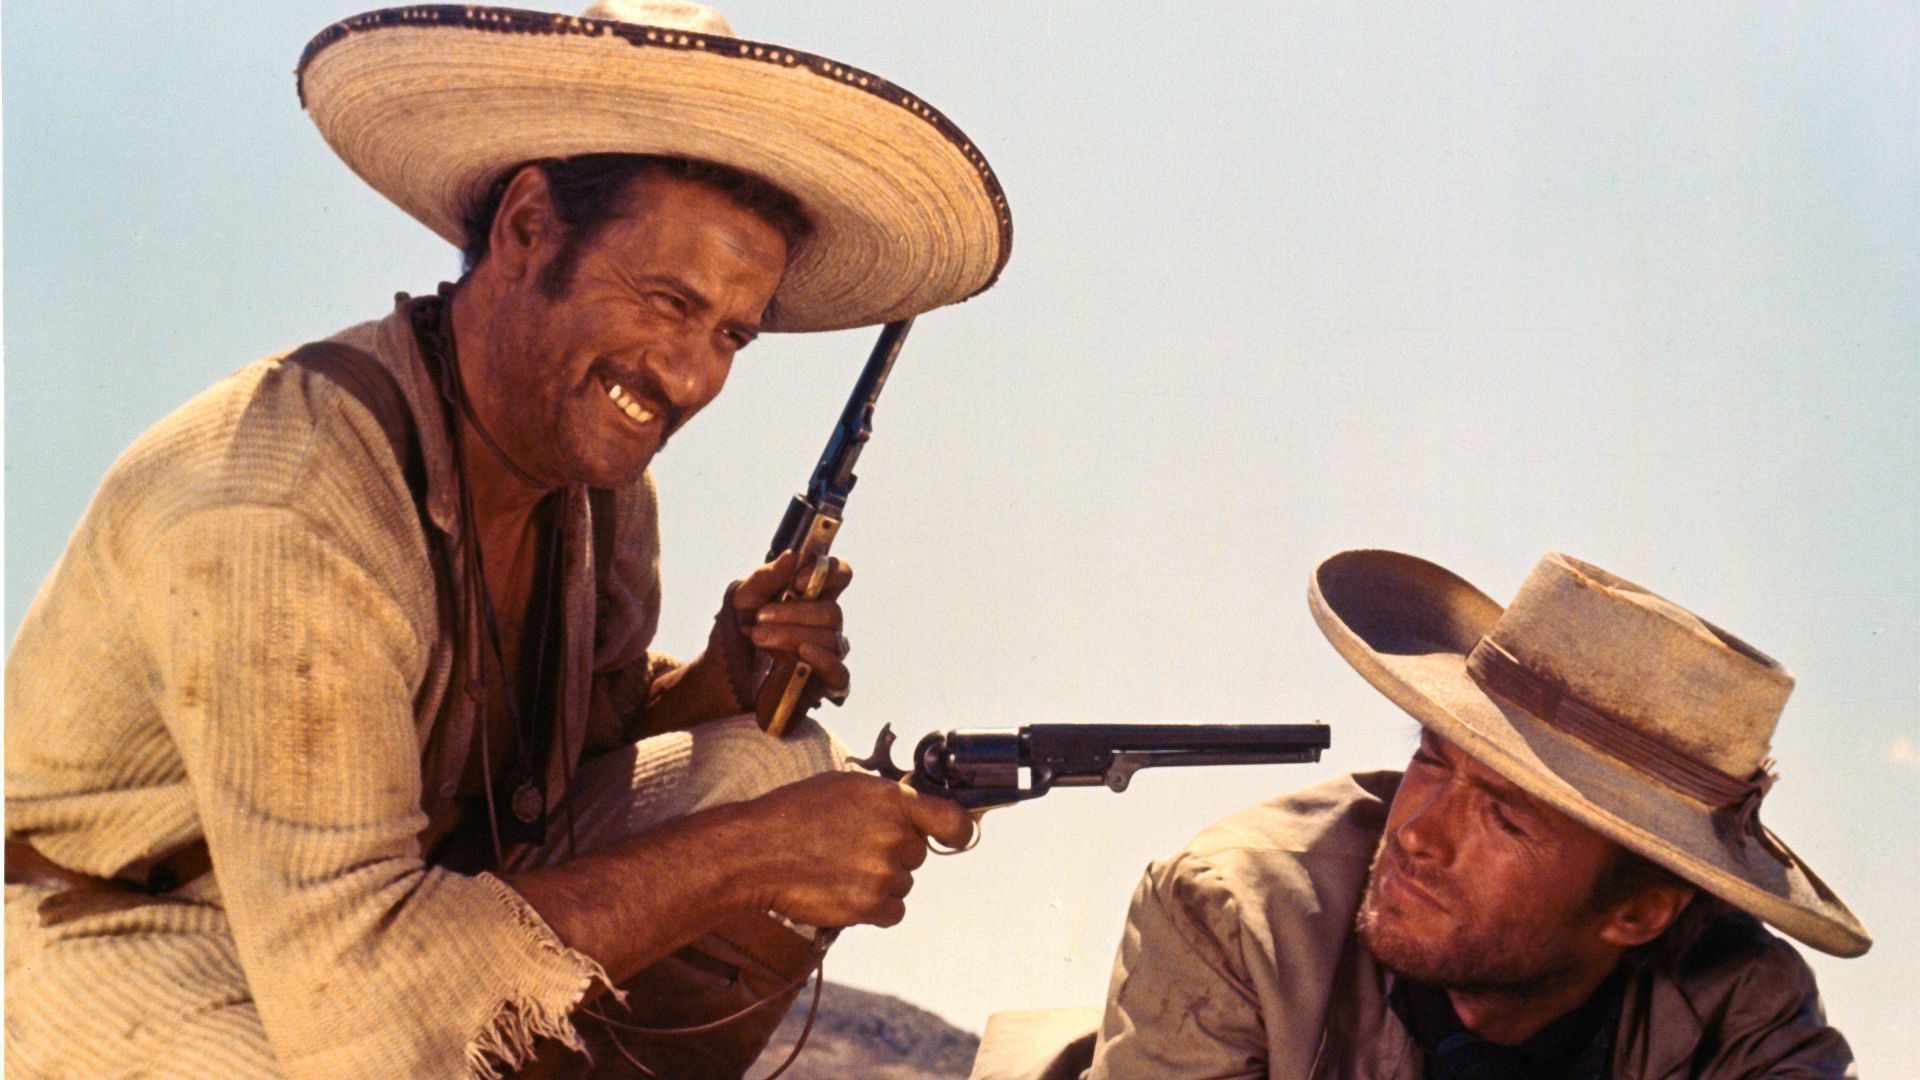 Eli Wallach as Tuco smiling and holding two guns while Clint Eastwood as Blondie looks at him with annoyance in The Good, the Bad, and the Ugly.